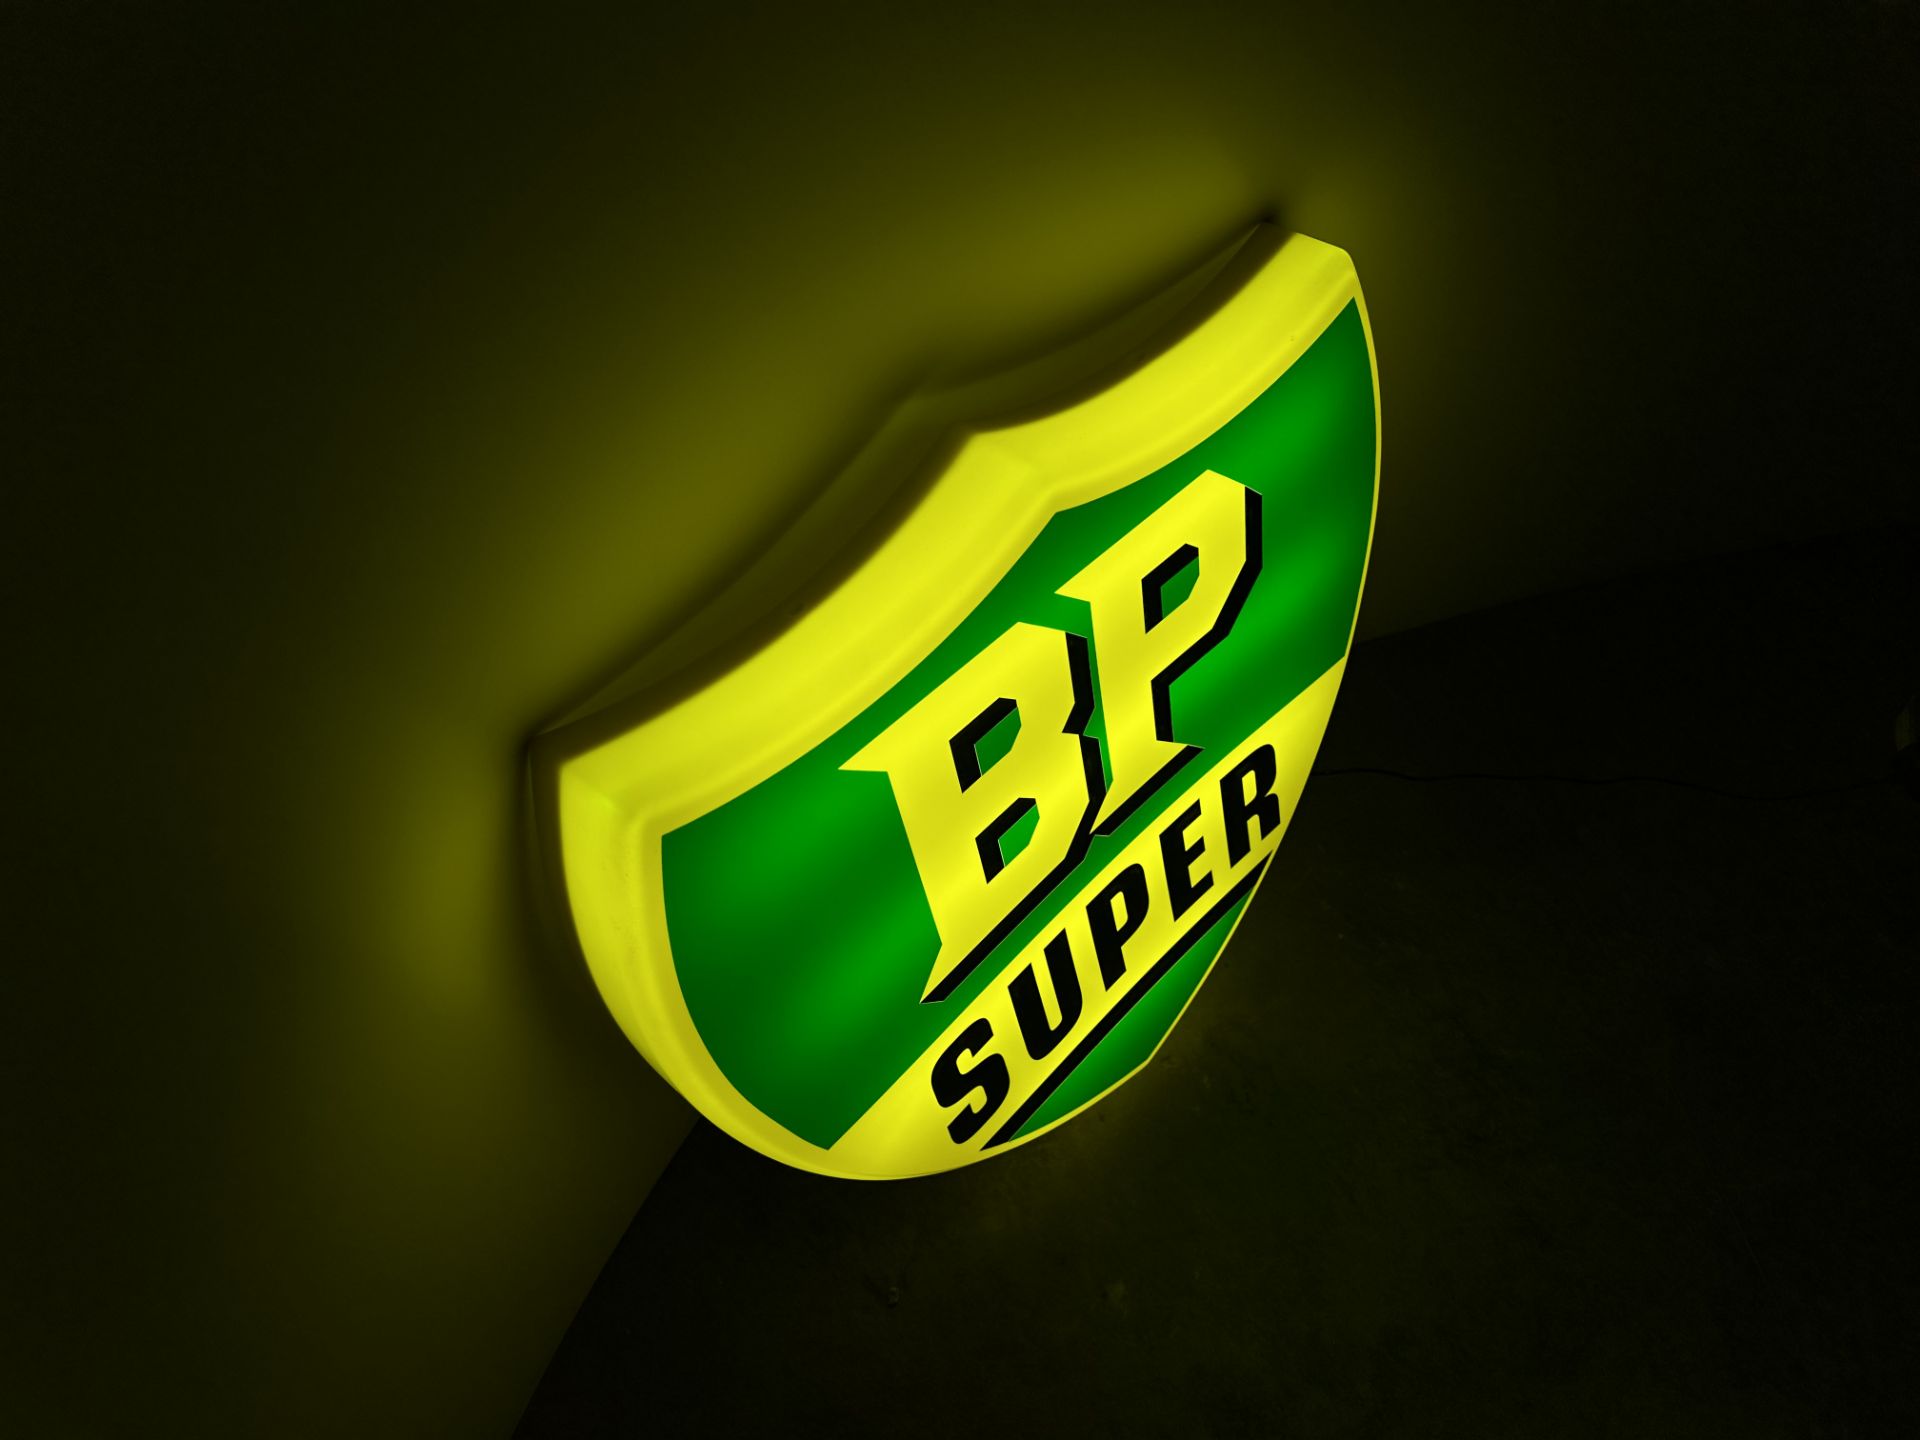 BP illumination sign in any country - Image 3 of 4